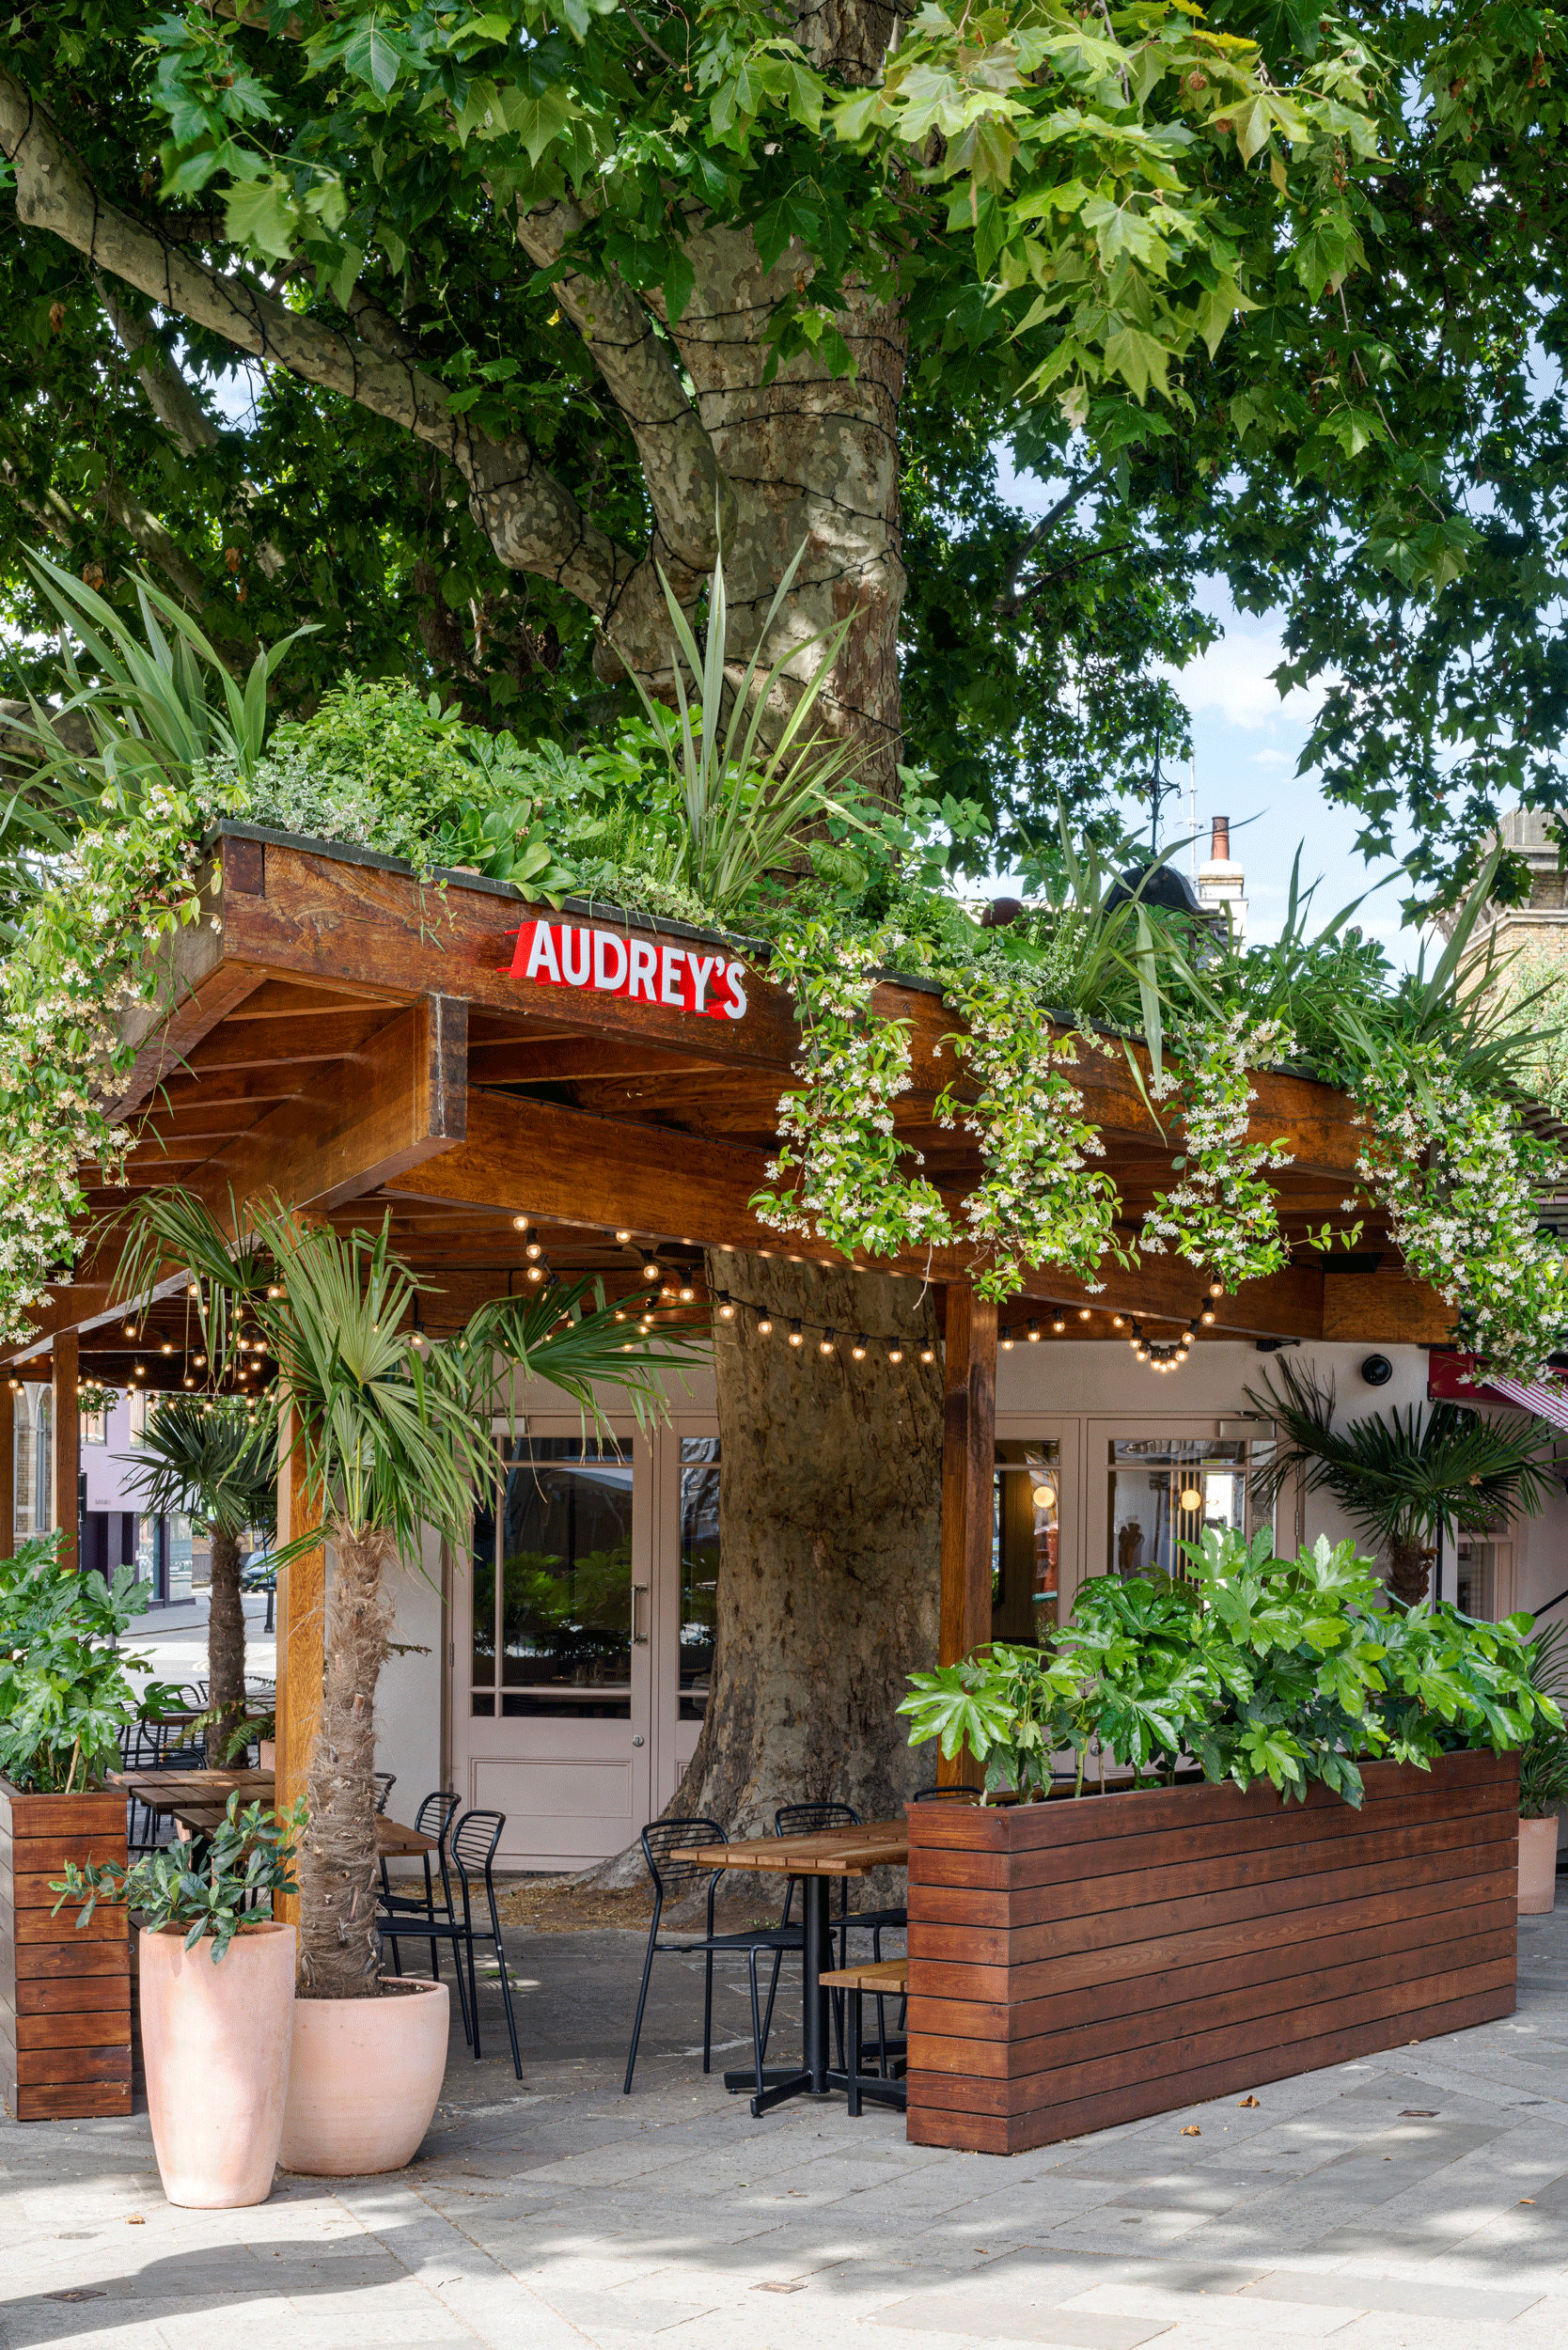 outside view of Audrey's Cafe & Bar Borough, London